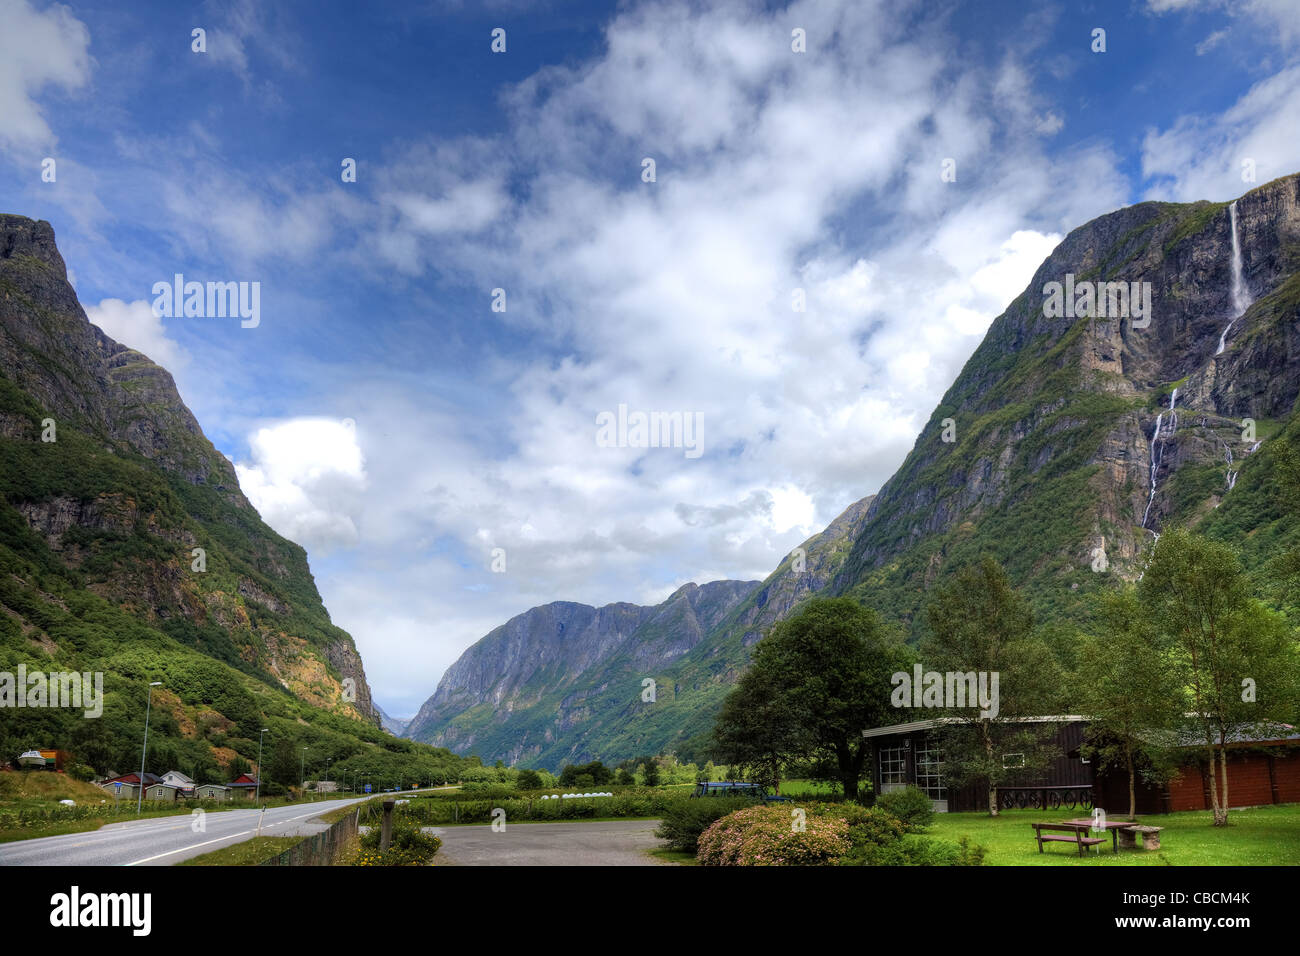 Small camping and picturesque landscape of norwegian mountains, scandinavian Europe. Stock Photo